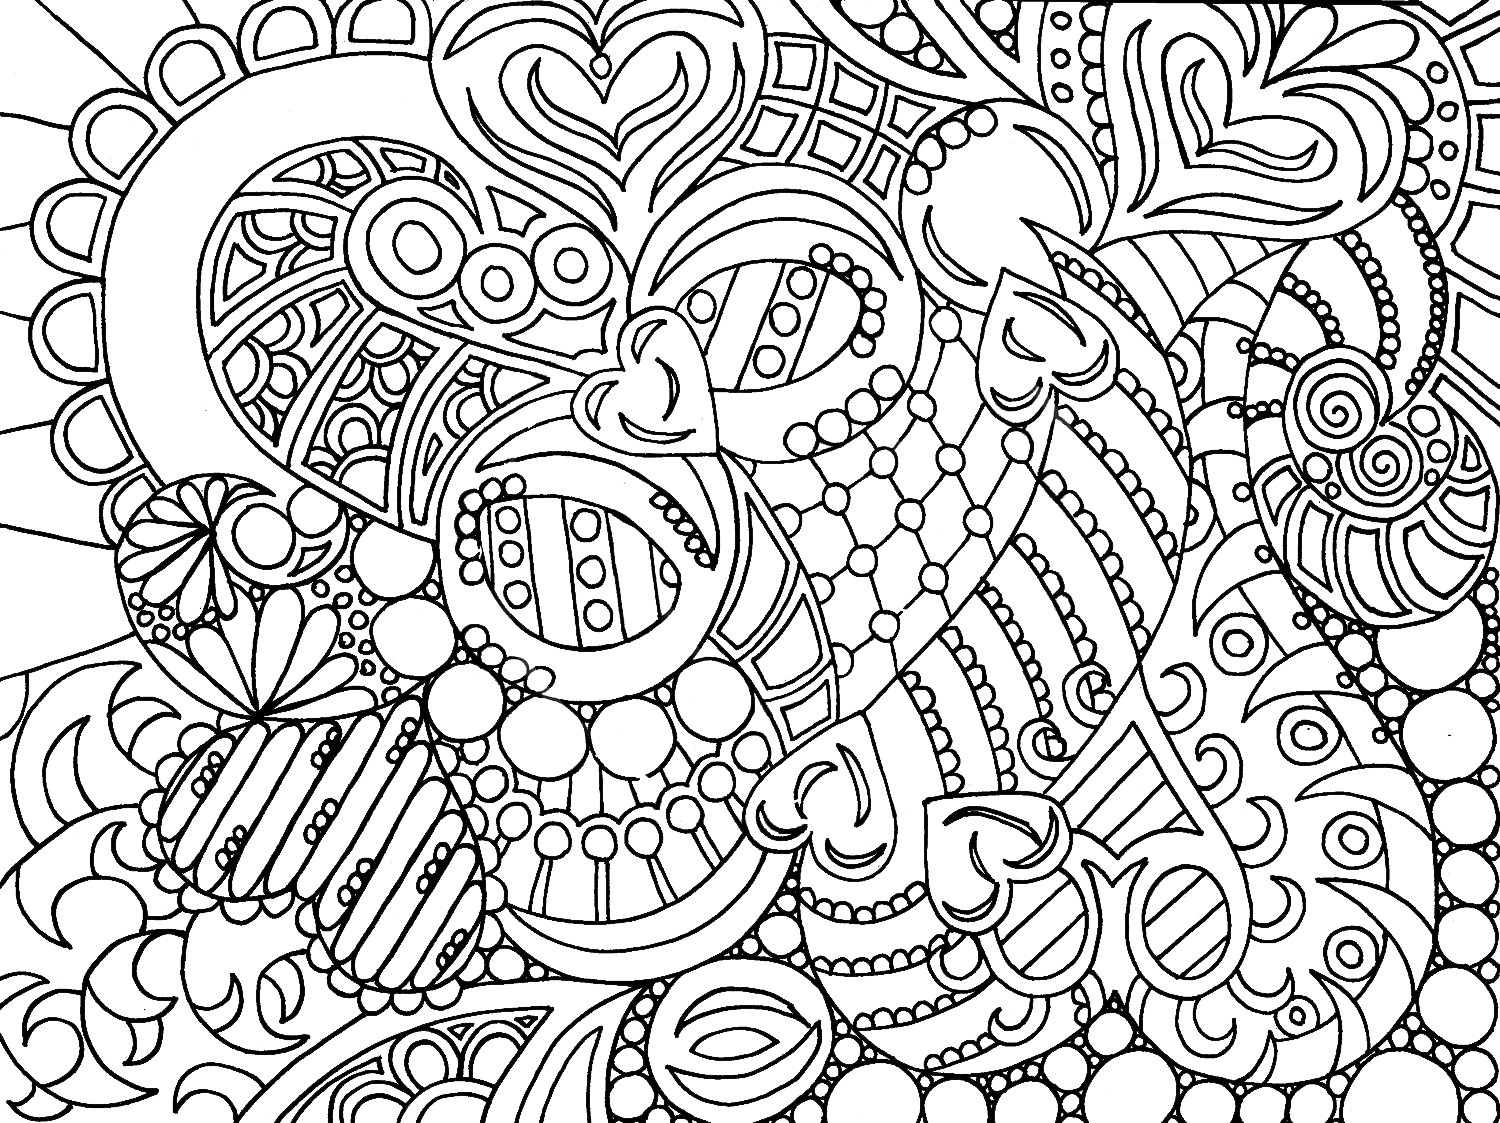 Online Coloring Pages For Adults
 Coloring Pages for Adults Free